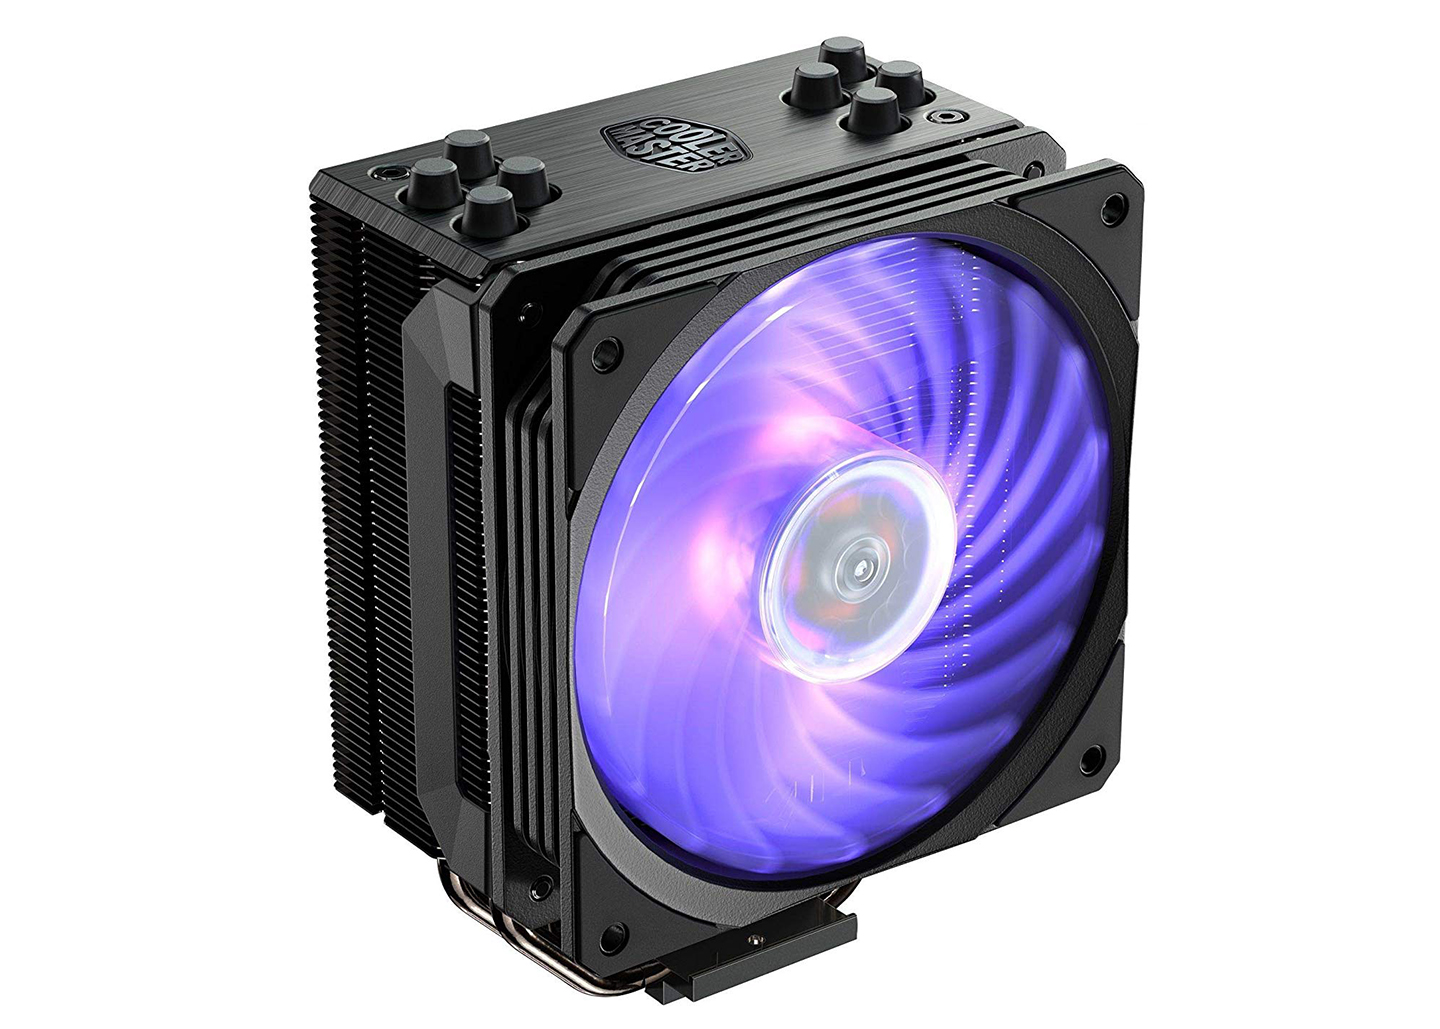 Cooler Master Hyper 212 RGB Black Edition with its RGB lighting on at an angle on a white background